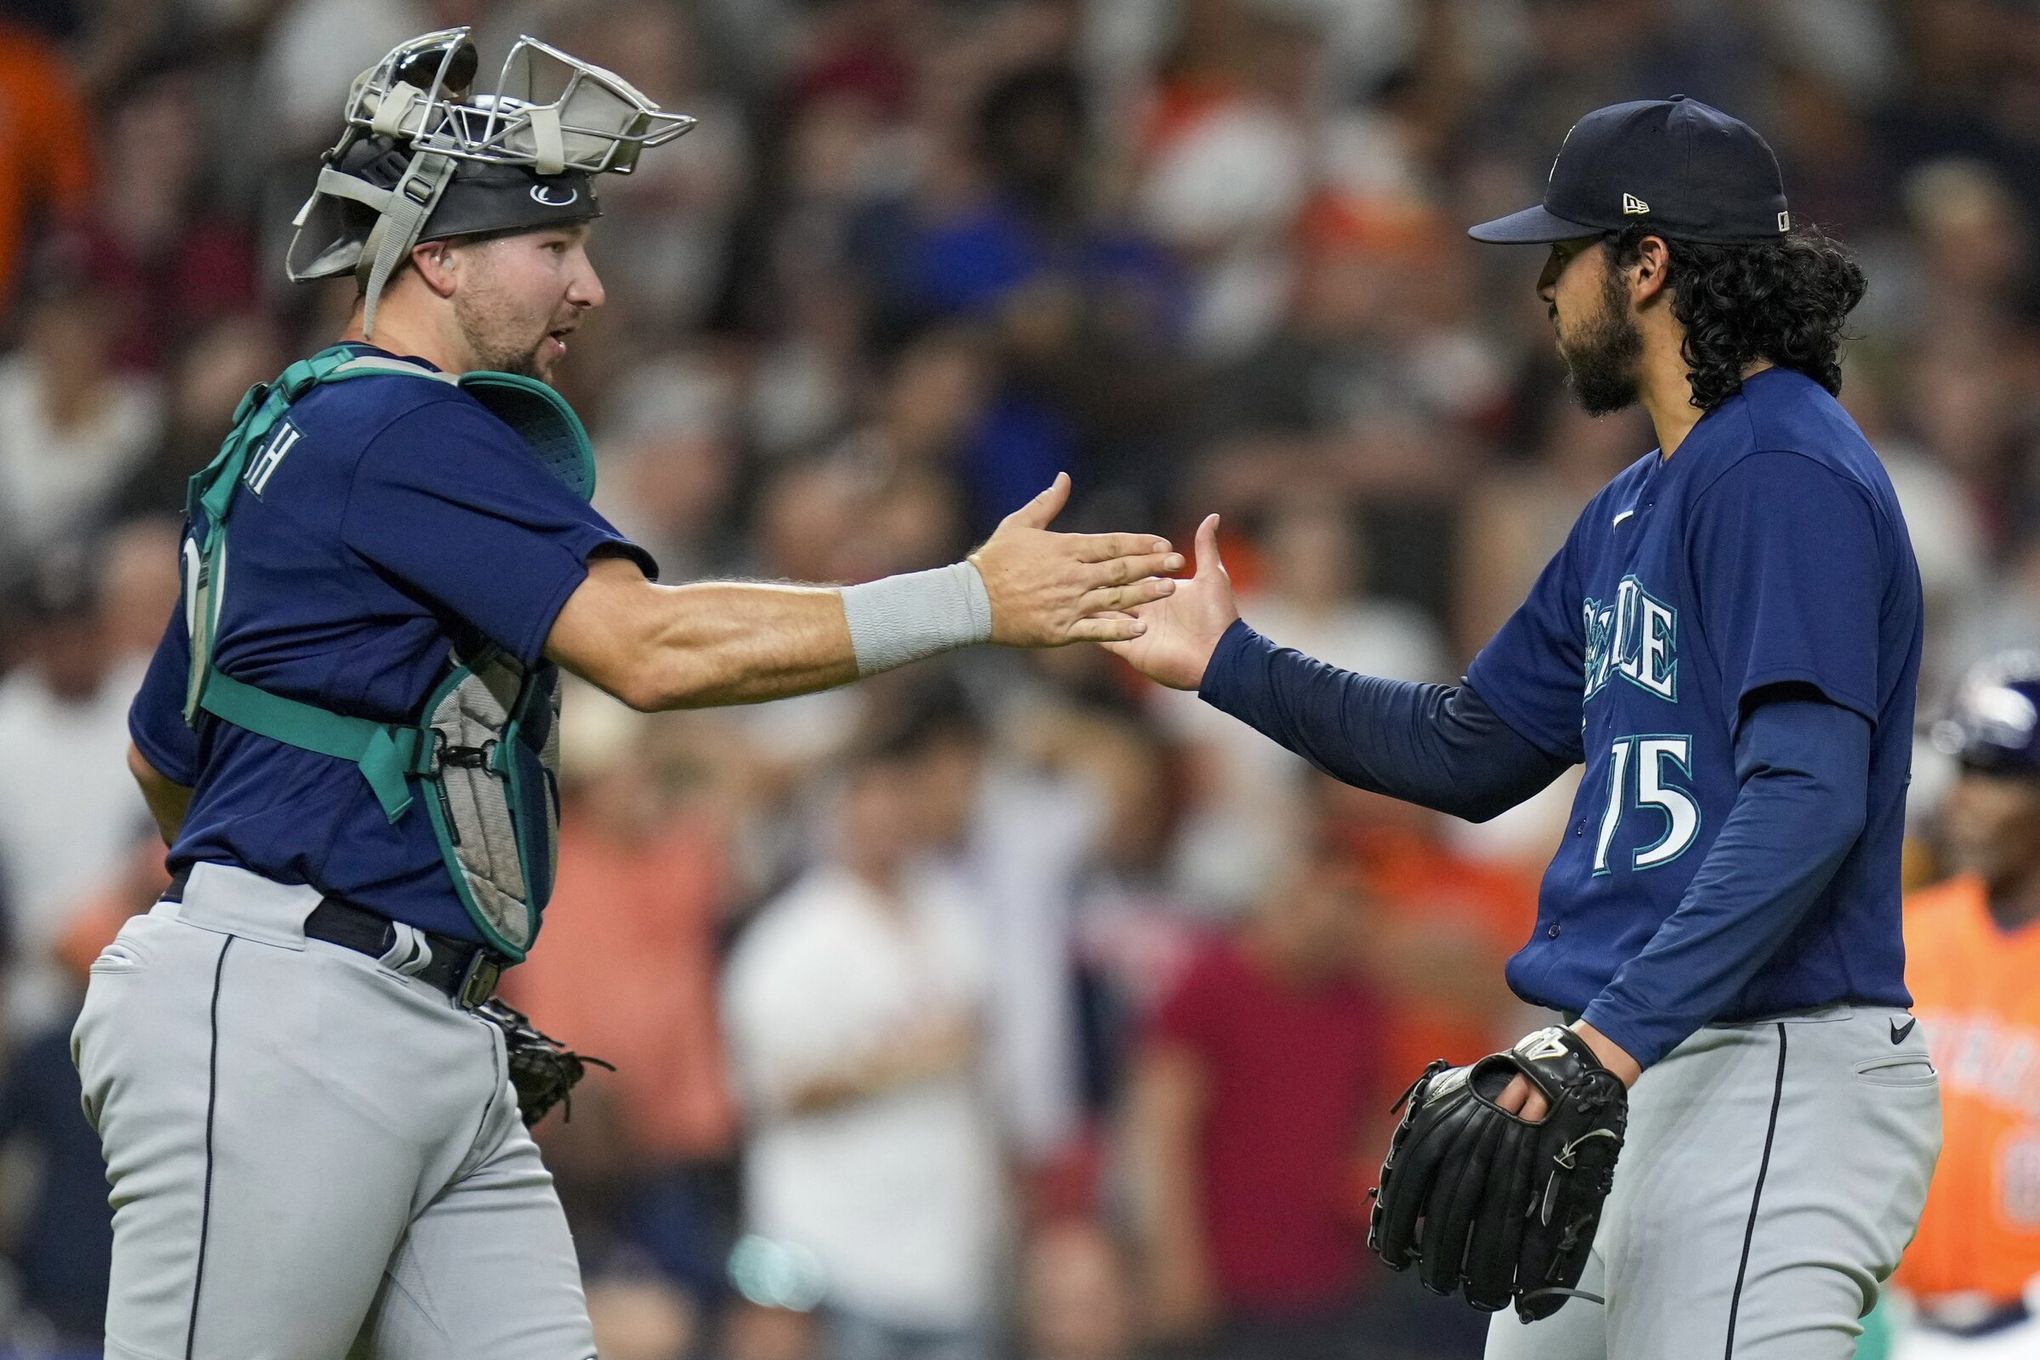 Mariners-Astros GameCenter: Live updates, highlights, how to watch